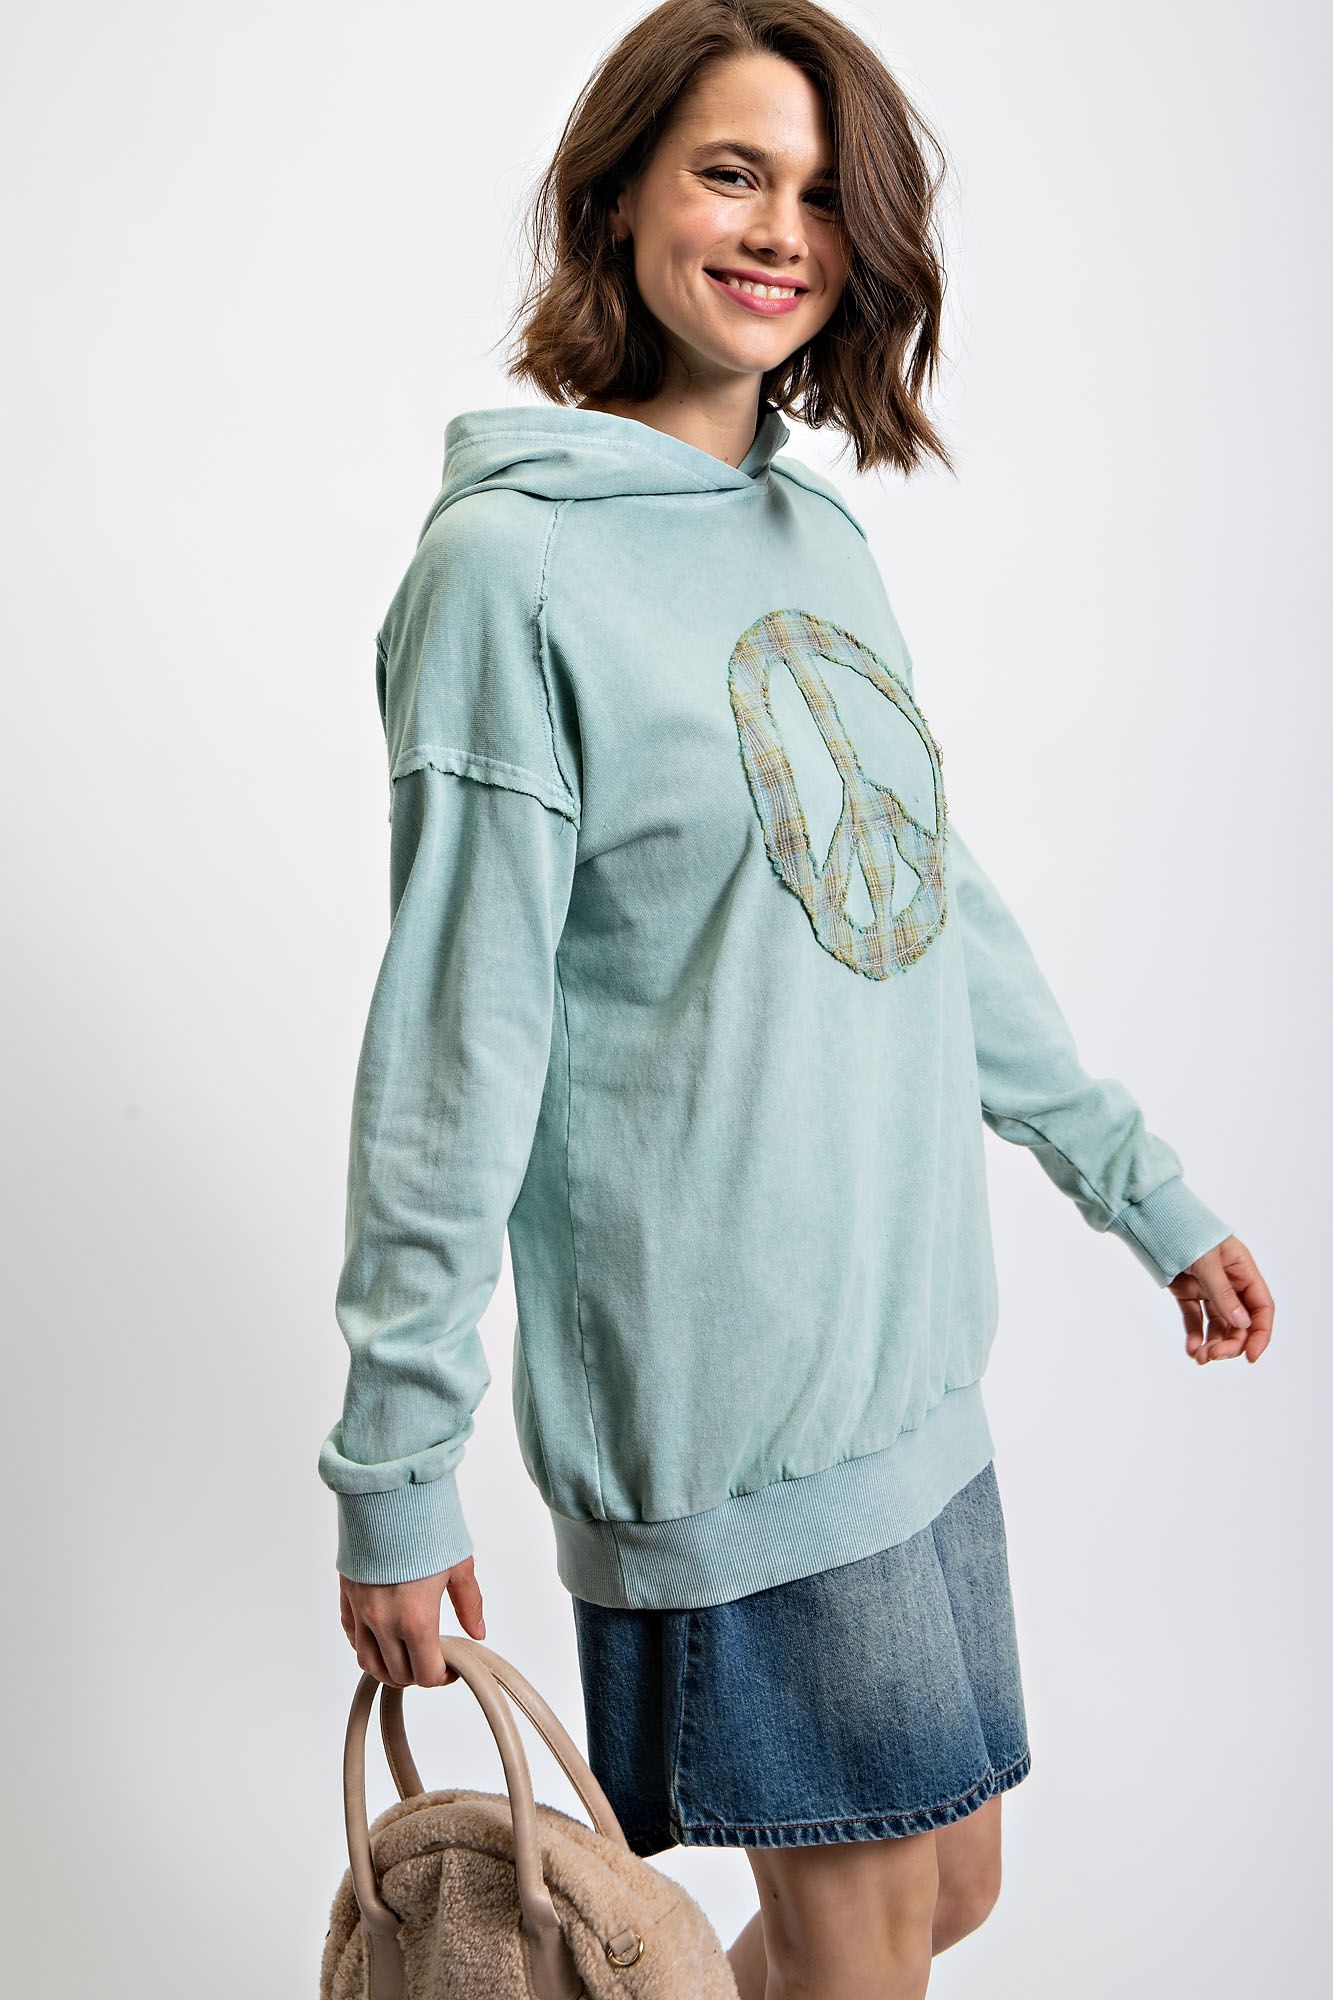 Peacemaker Washed Terry Knit Pullover Hoodie in Seafoam